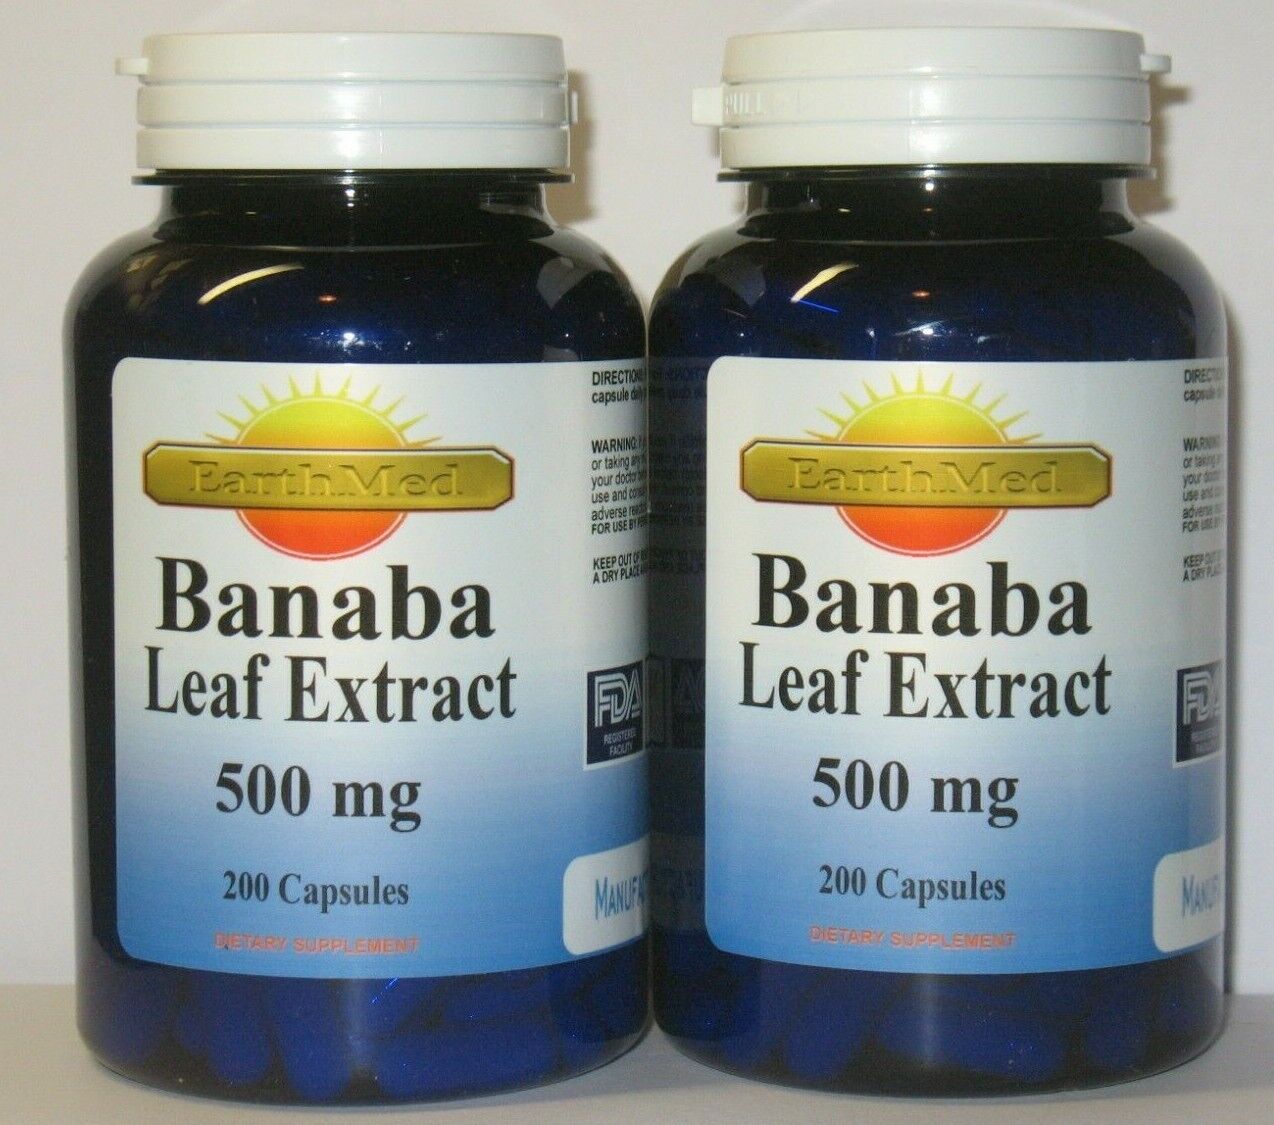 2x Banaba Leaf Extract 500mg 400 capsules total EarthMed 14382